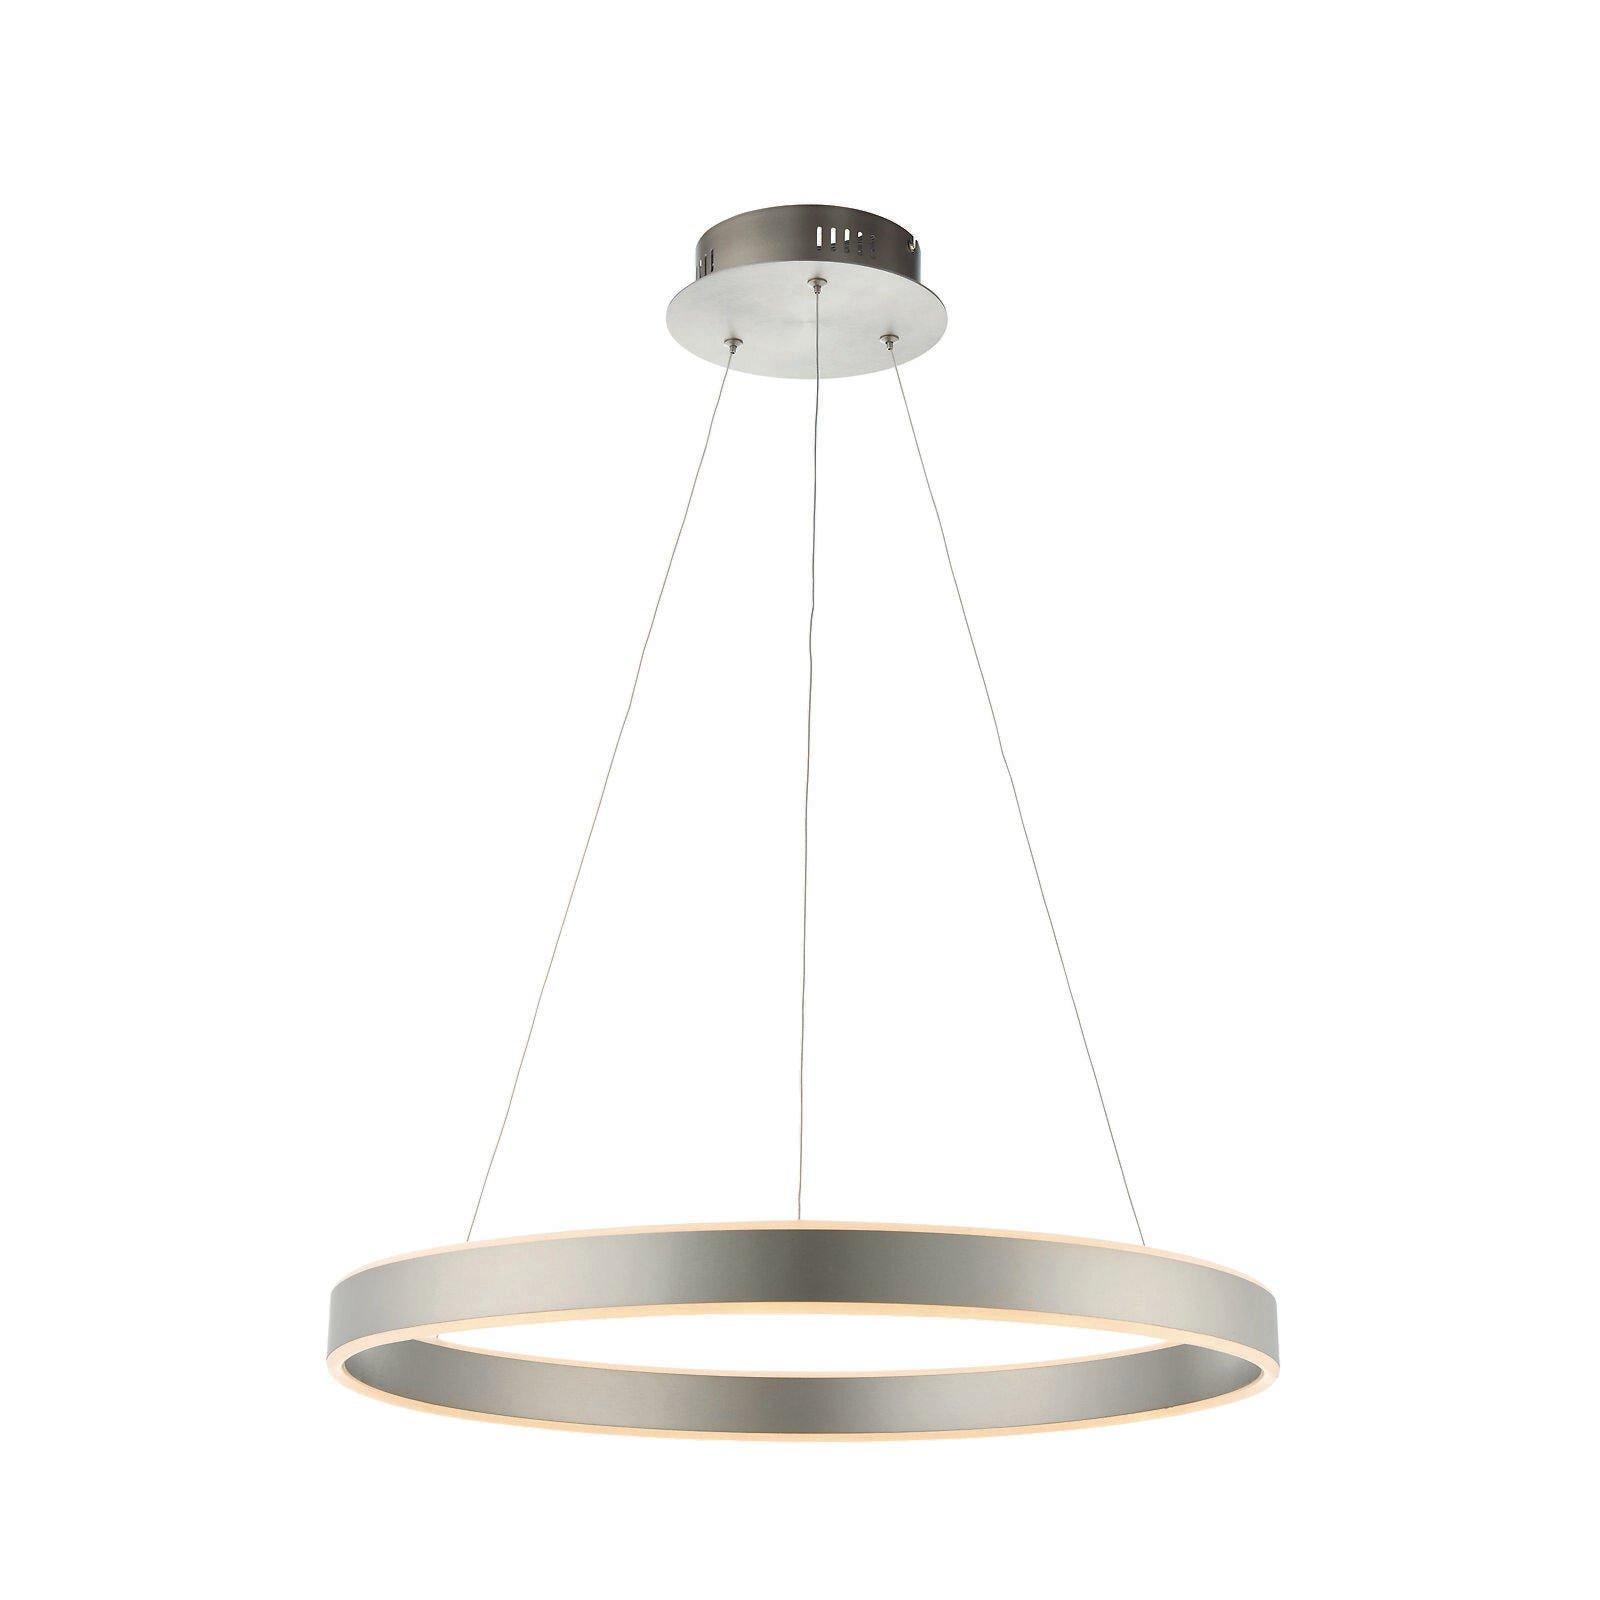 Ceiling Pendant Light Matt Nickel & Frosted Acrylic 43W LED Bulb Included